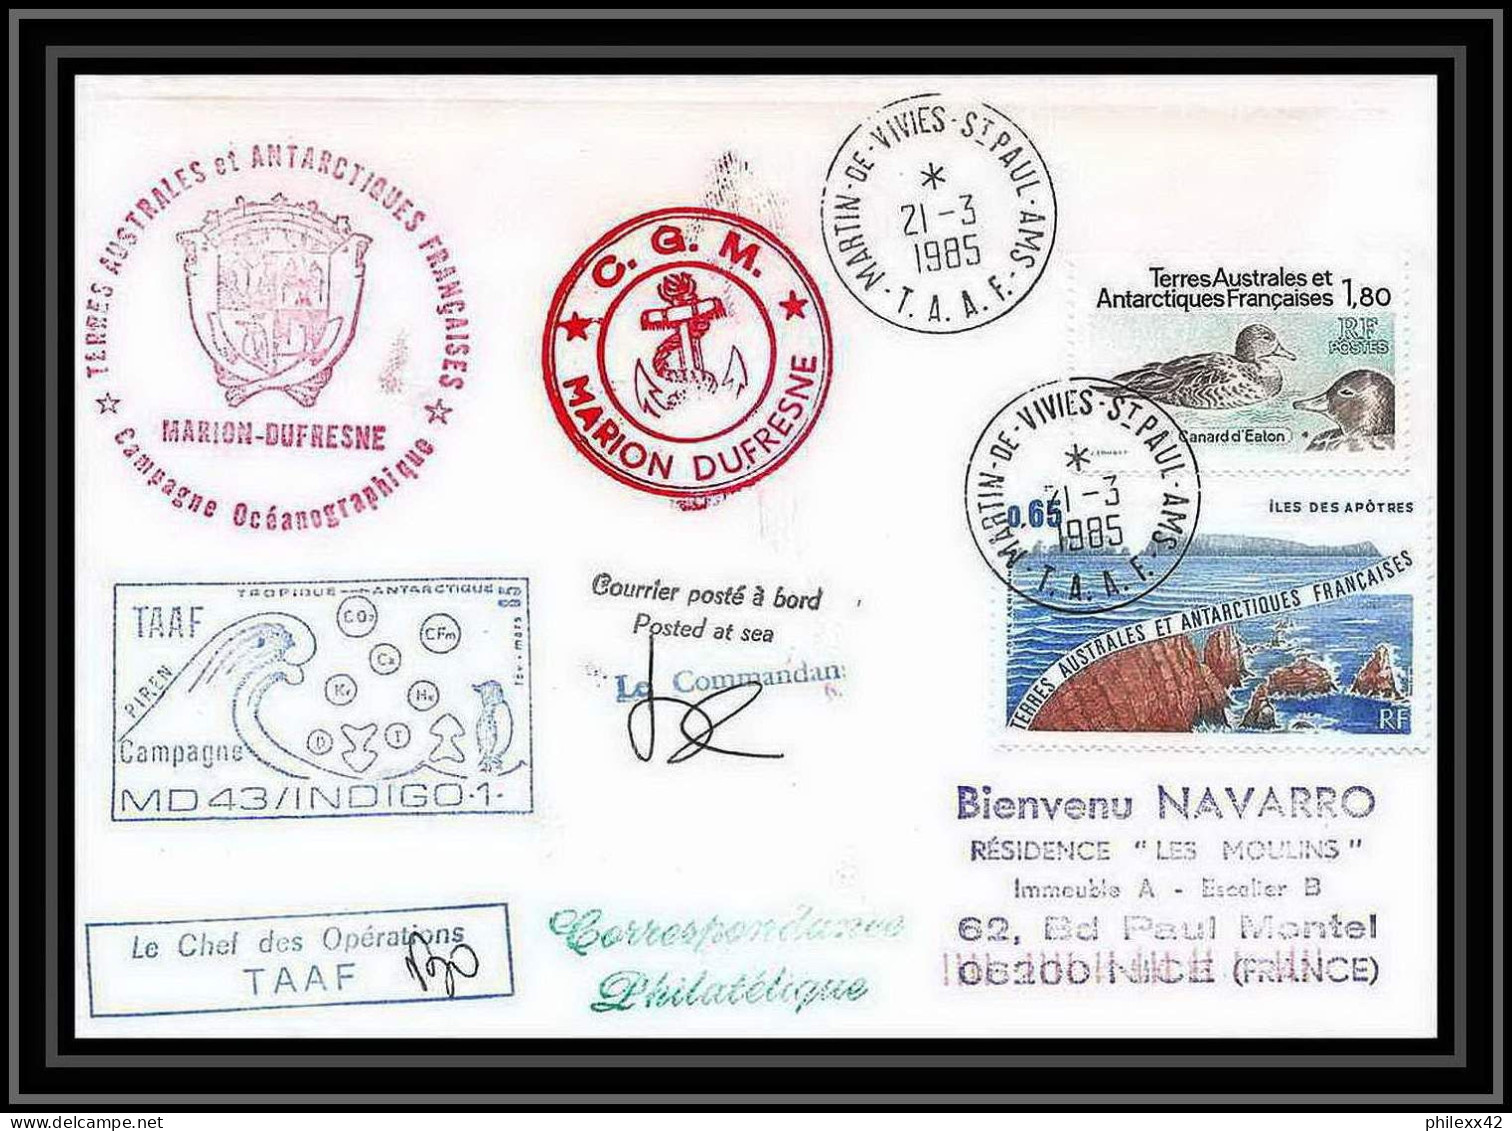 1519 Campagne Md 43 Indigo 1 21/3/1985 Signé Signed Marion Dufresne TAAF Antarctic Terres Australes Lettre (cover) - Antarctische Expedities